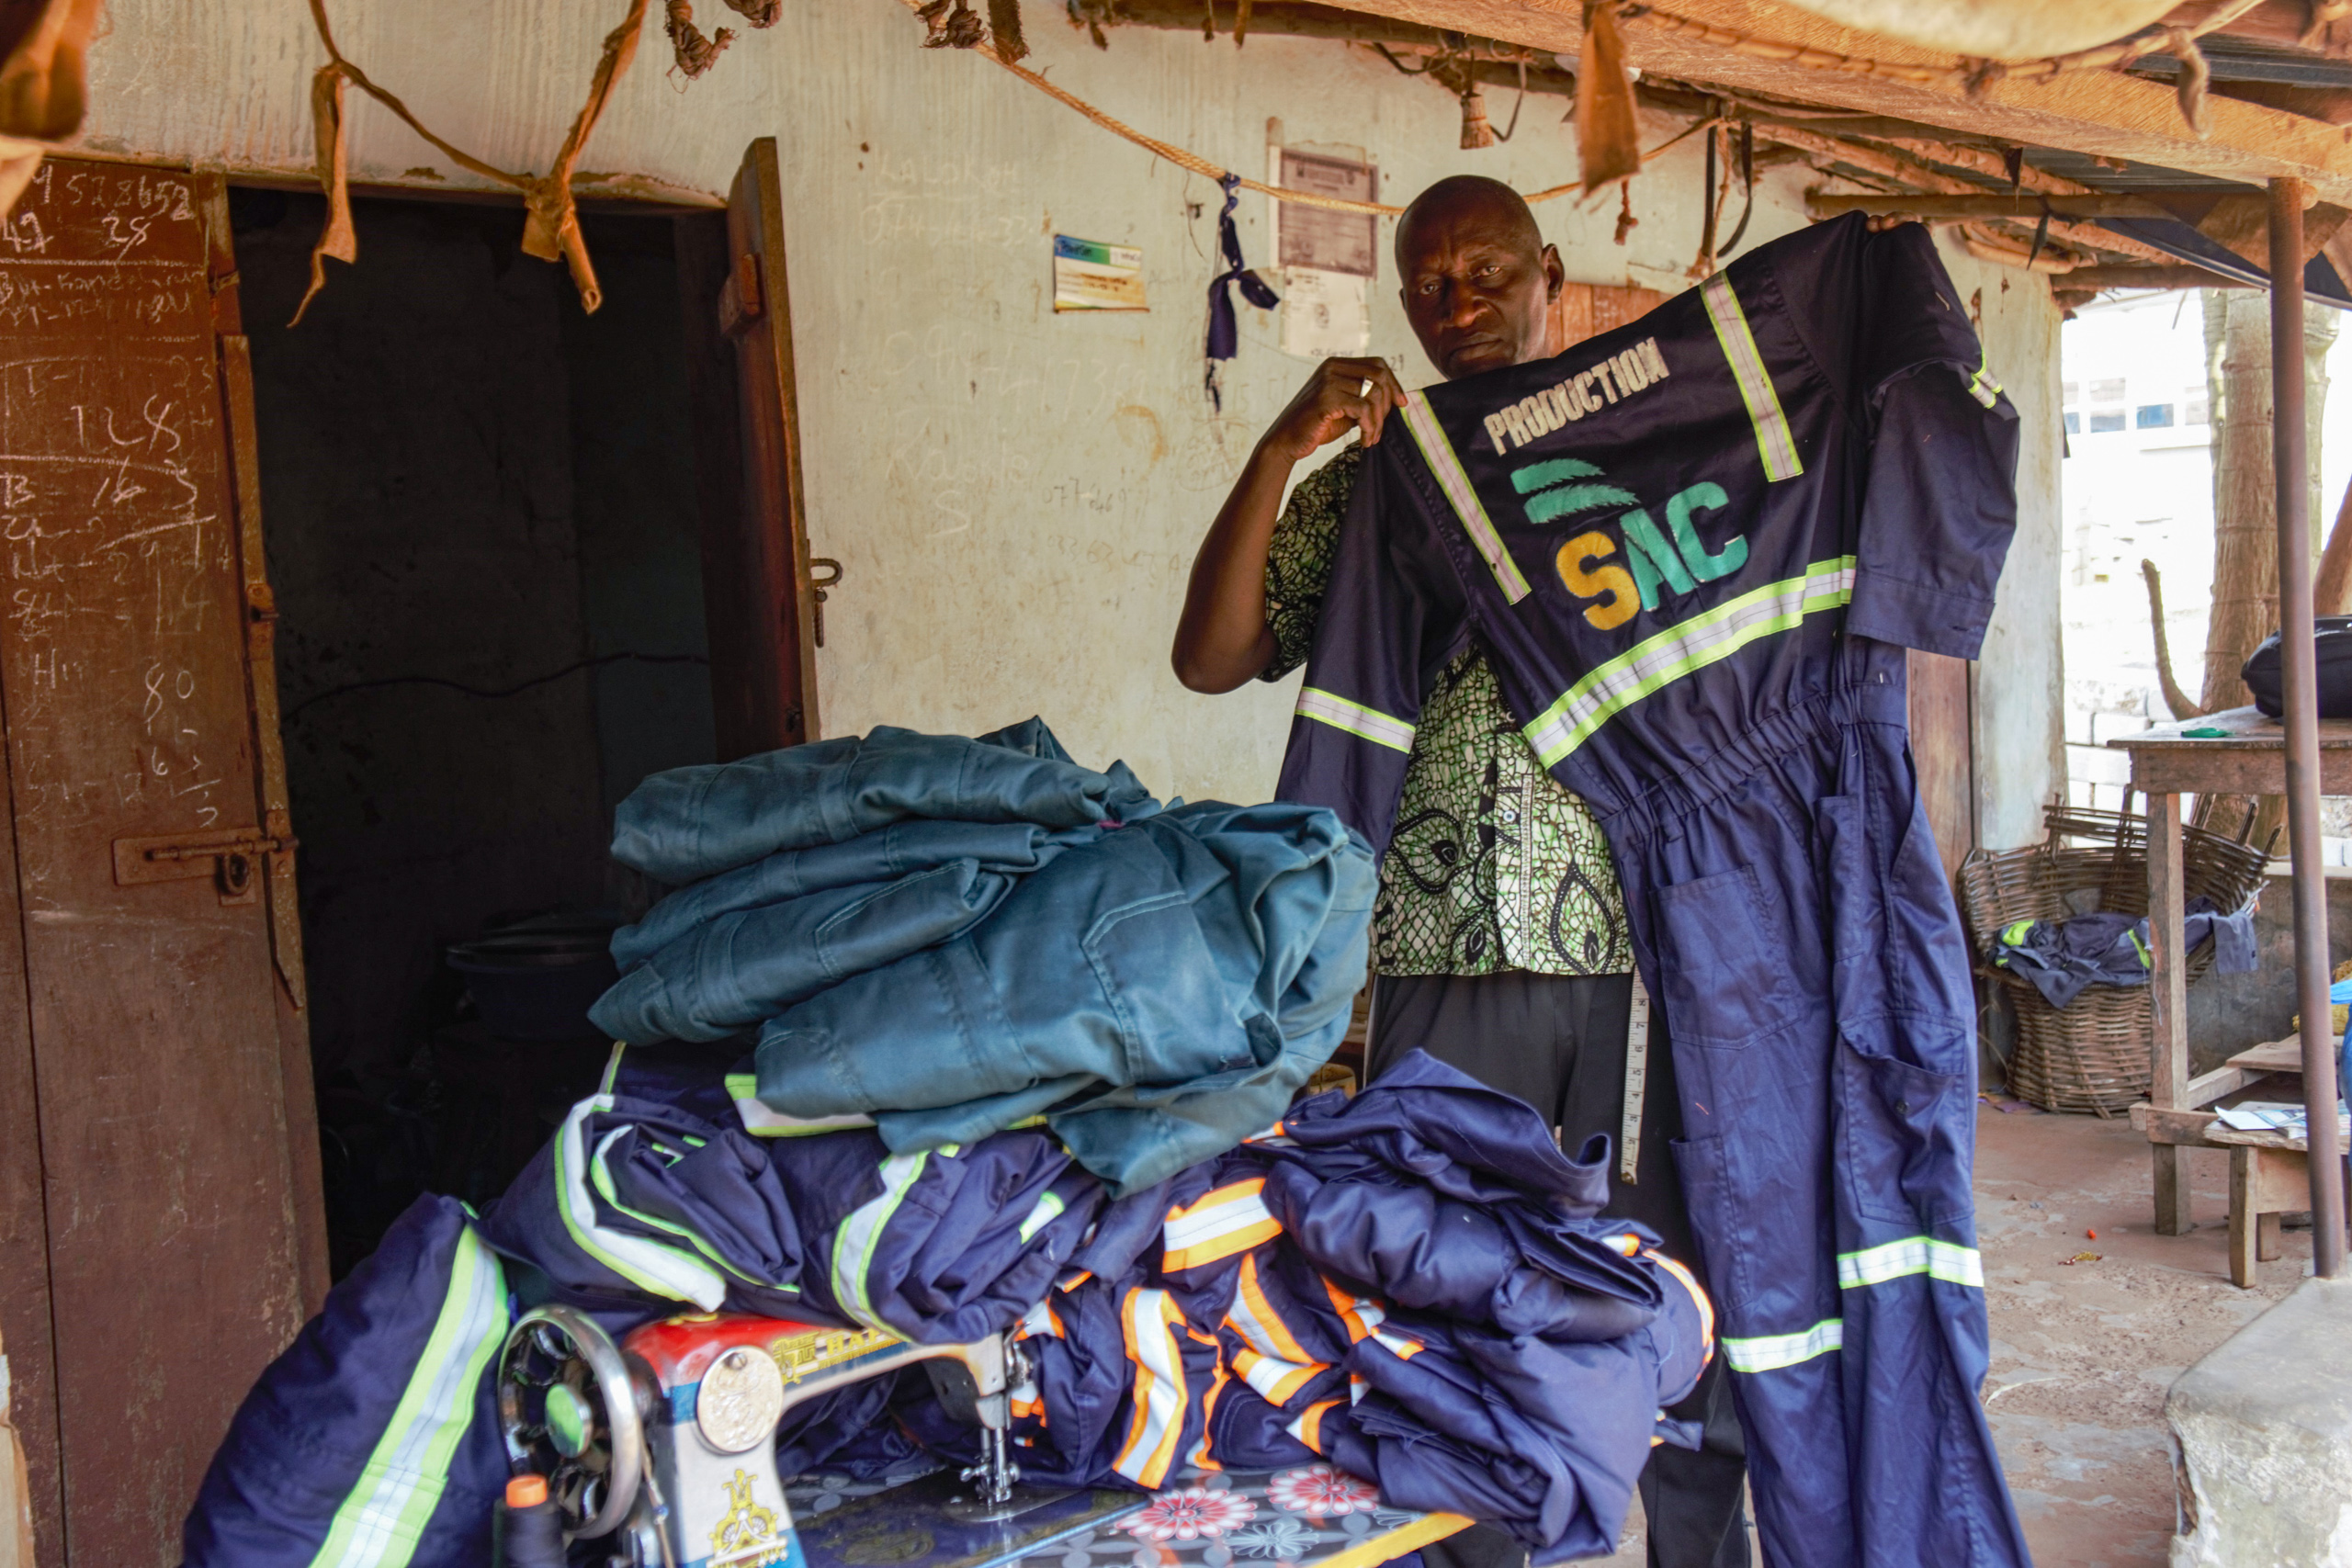 Tailor Mohamed Keita benefits from a contract to make uniforms for SAC workers